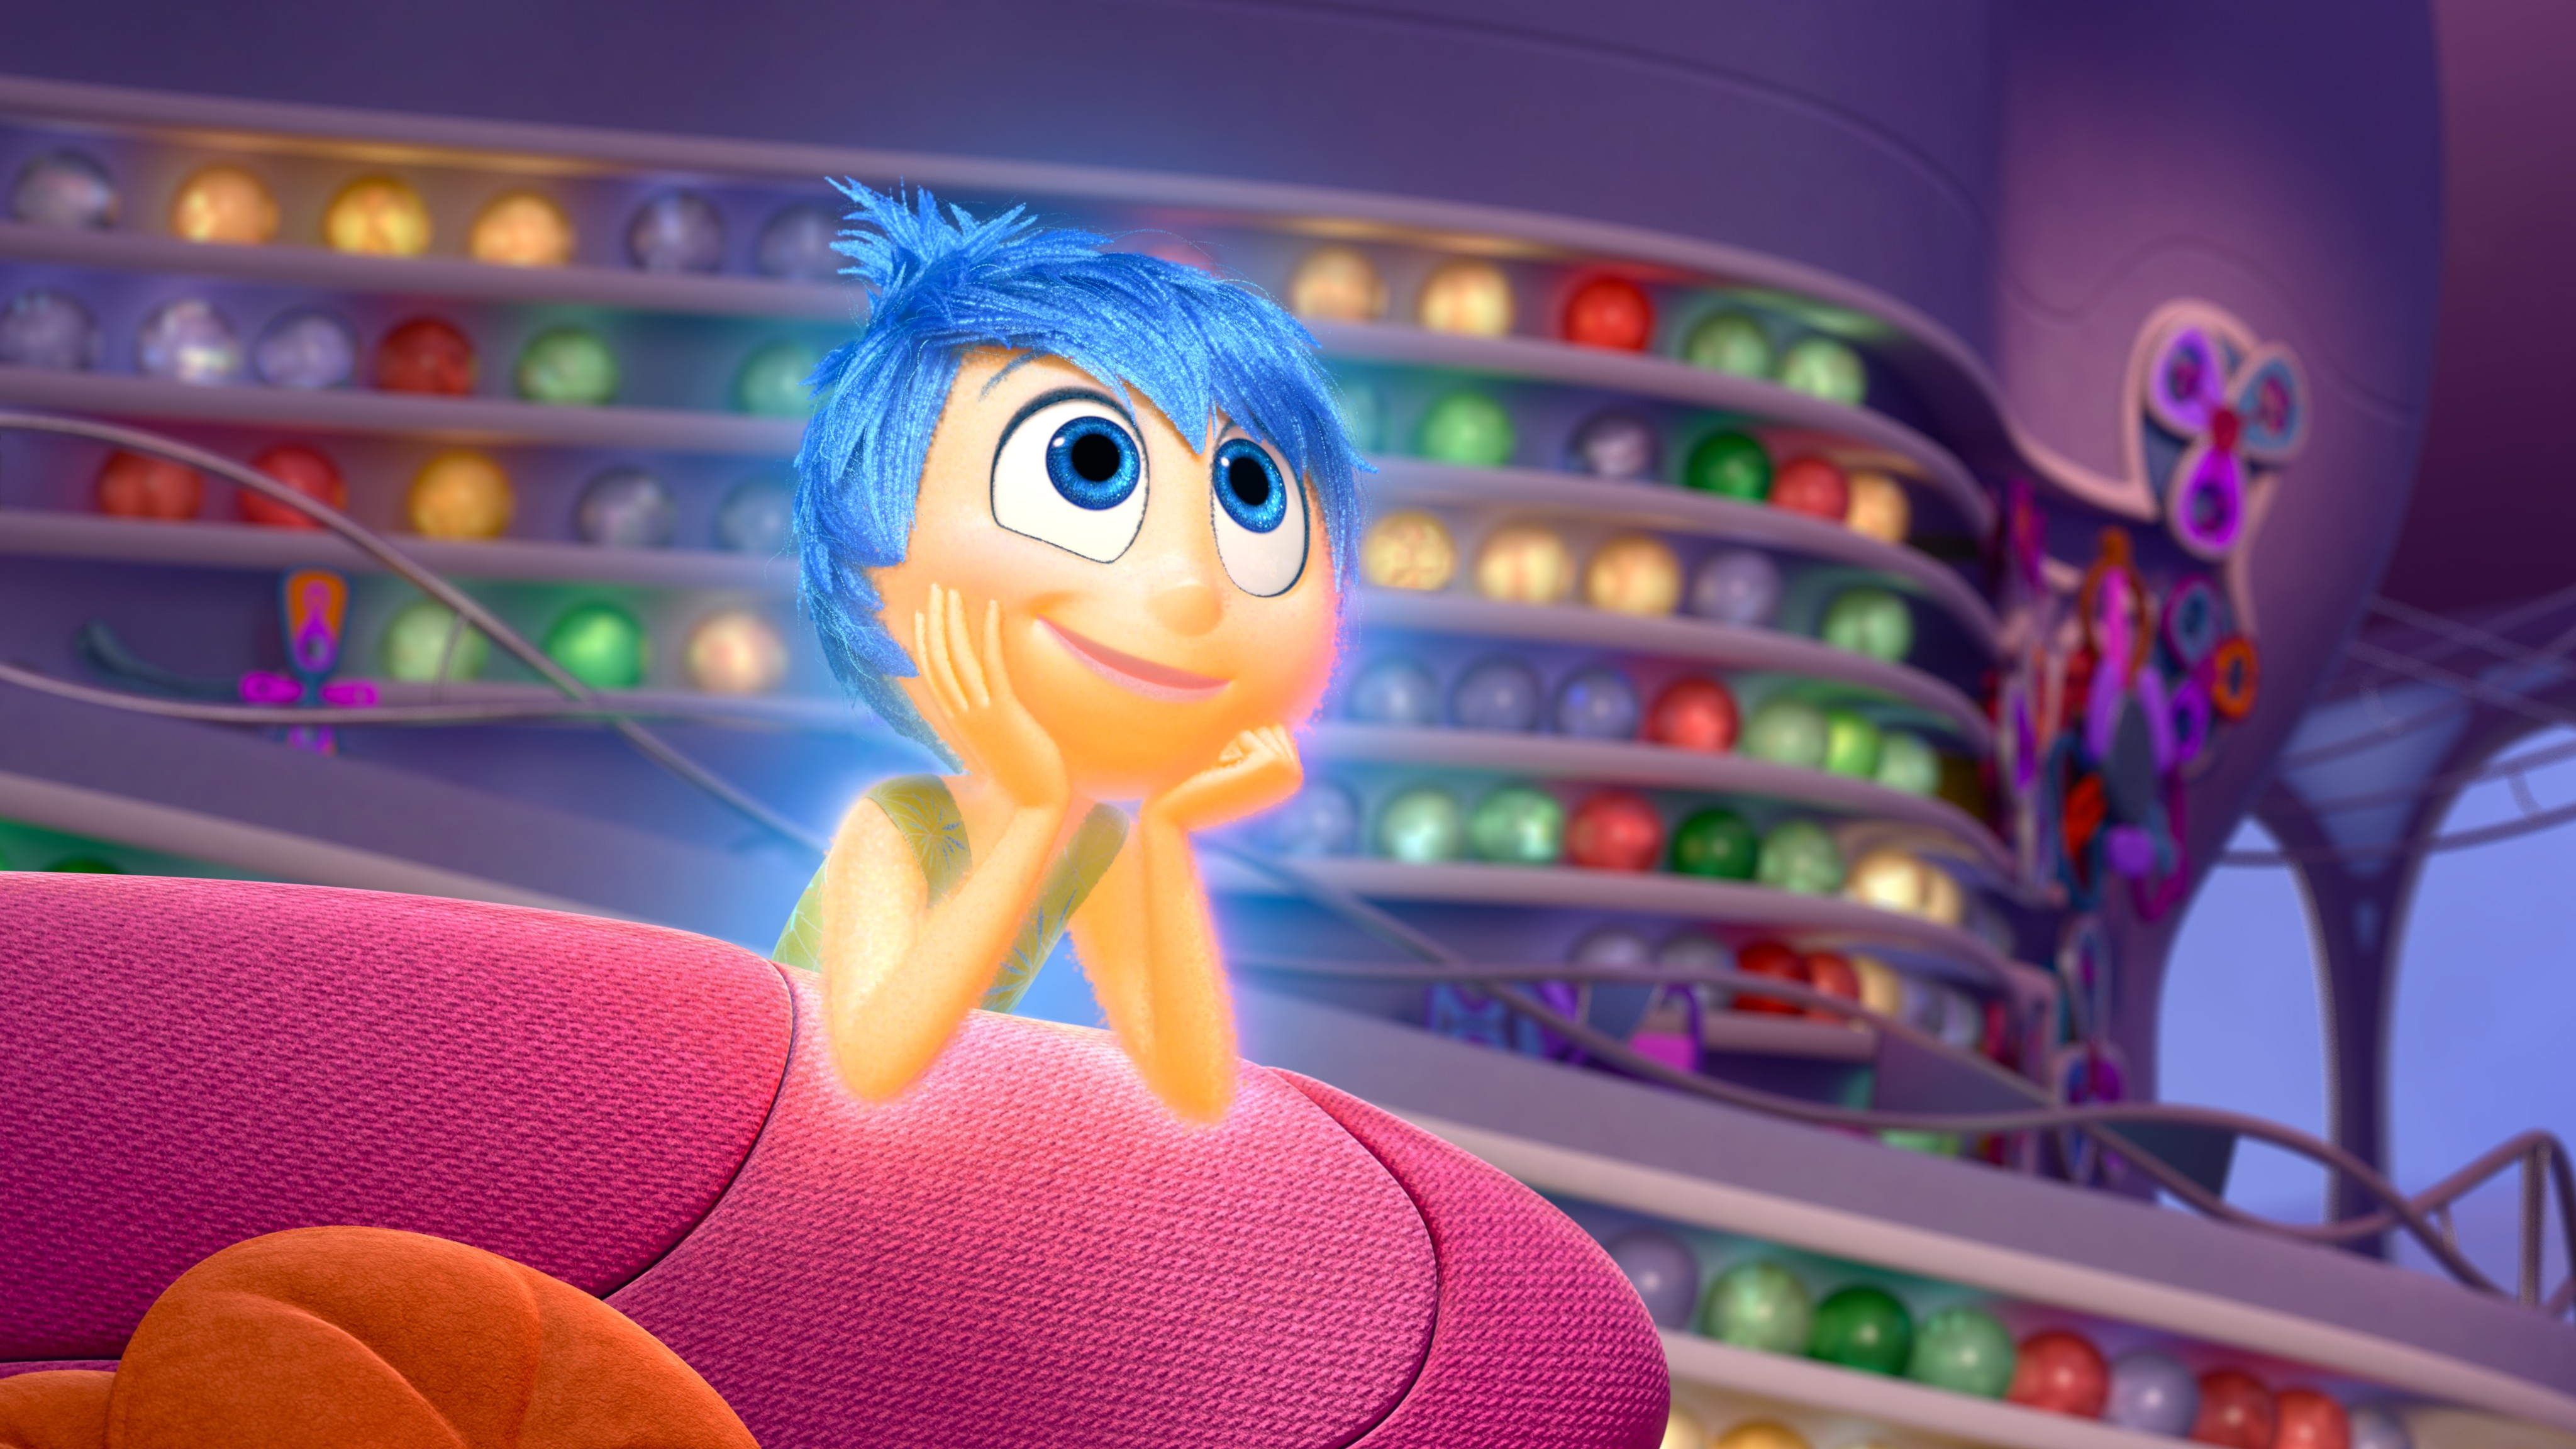 Joy (voiced by Amy Poehler) in a still from Inside Out.